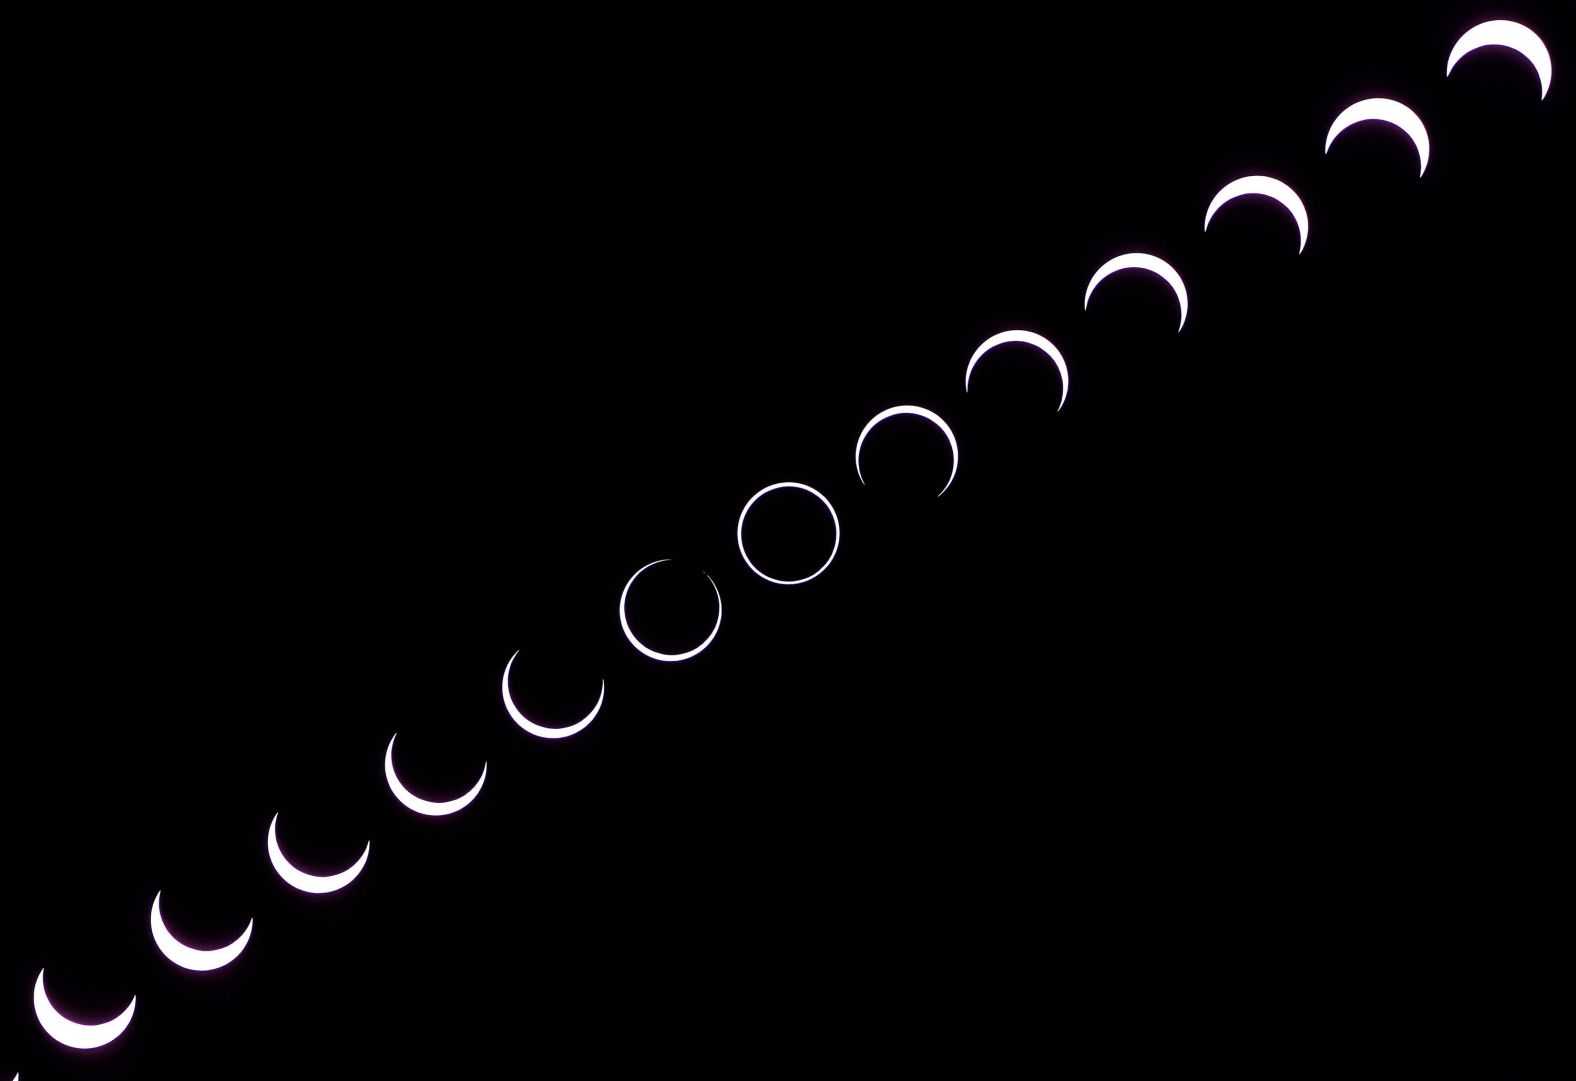 Multiple exposures were combined to produce this image of the eclipse's stages, as seen from Bluff, Utah.